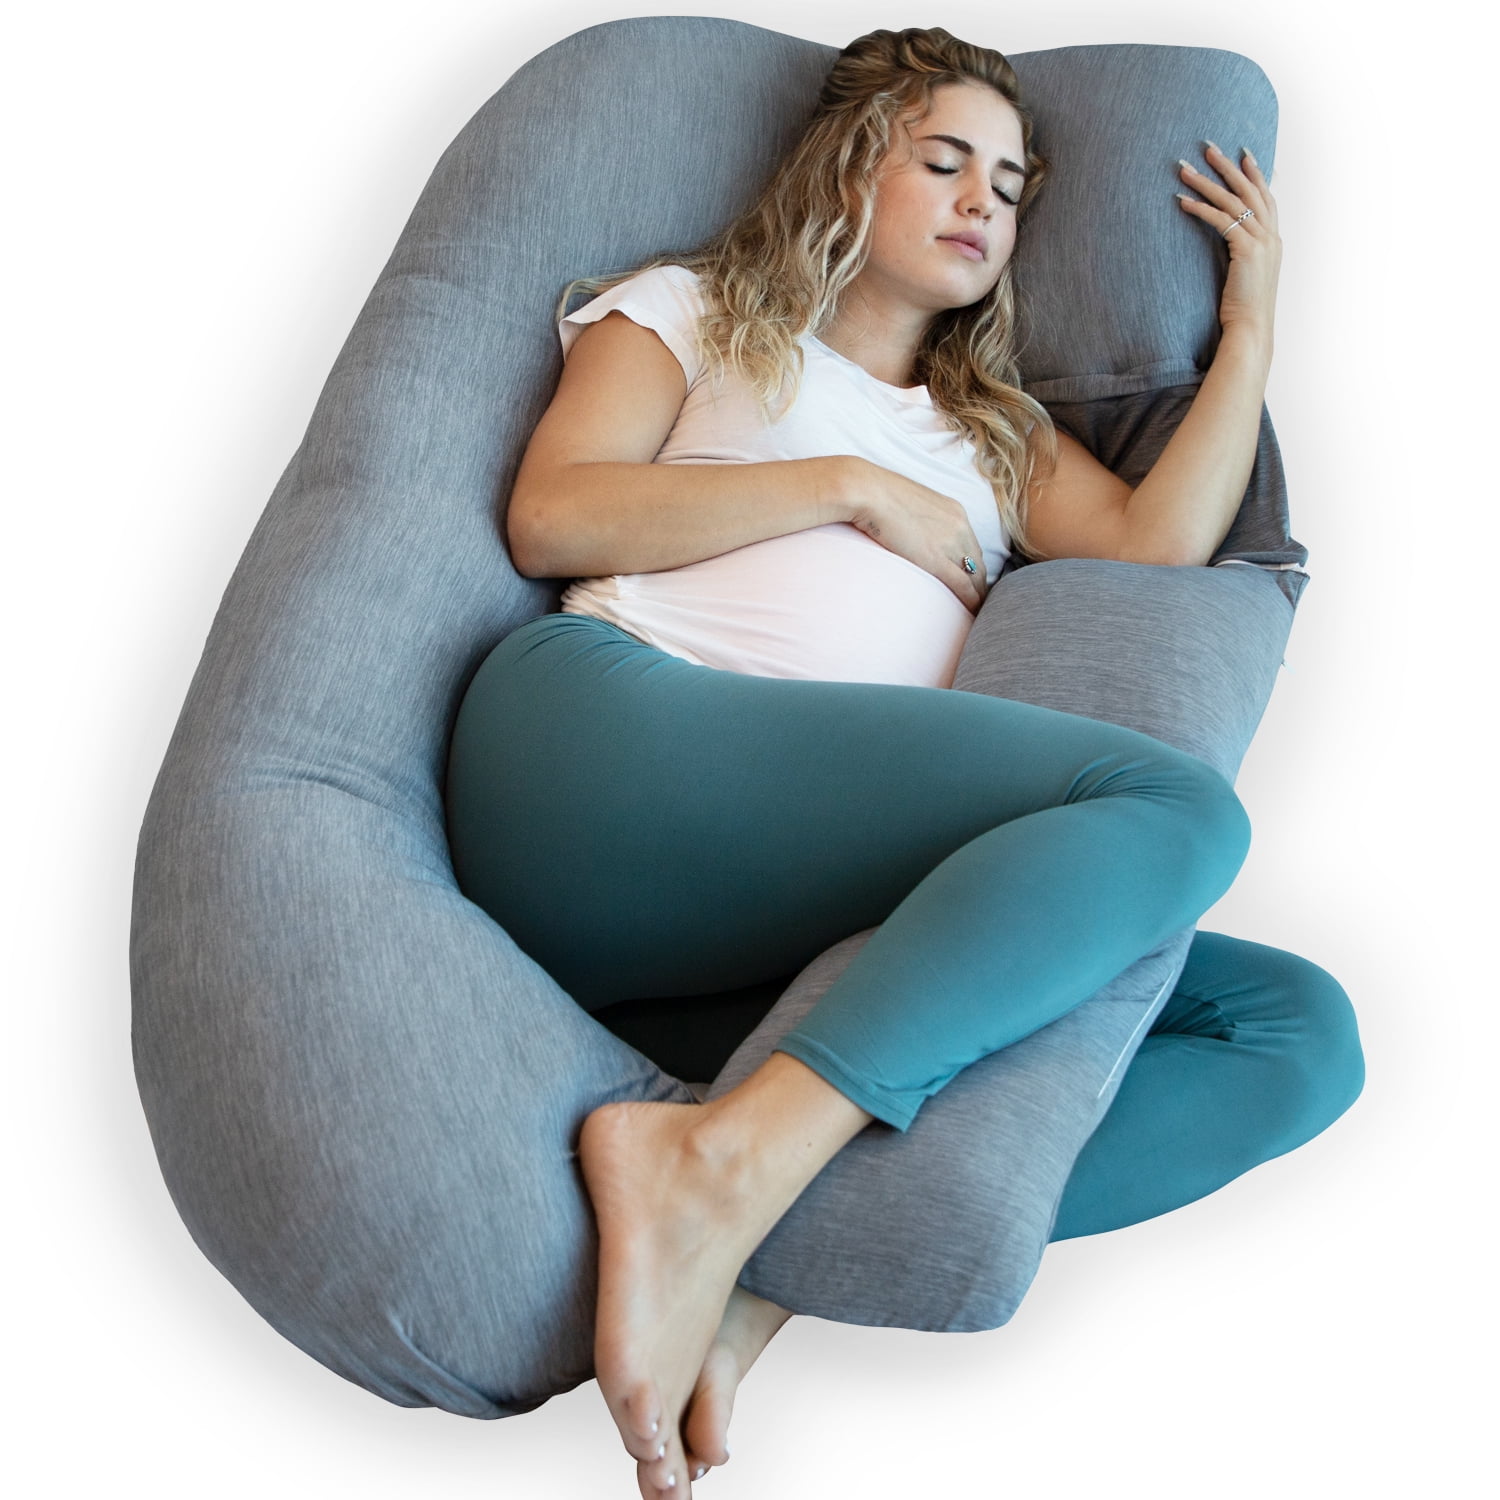 Pharmedoc Pregnancy Pillow, U-Shape Cooling Cover - Dark Grey with Detachable Side - Support for Back, Hips, Legs, Belly for Pregnant Women, Blue